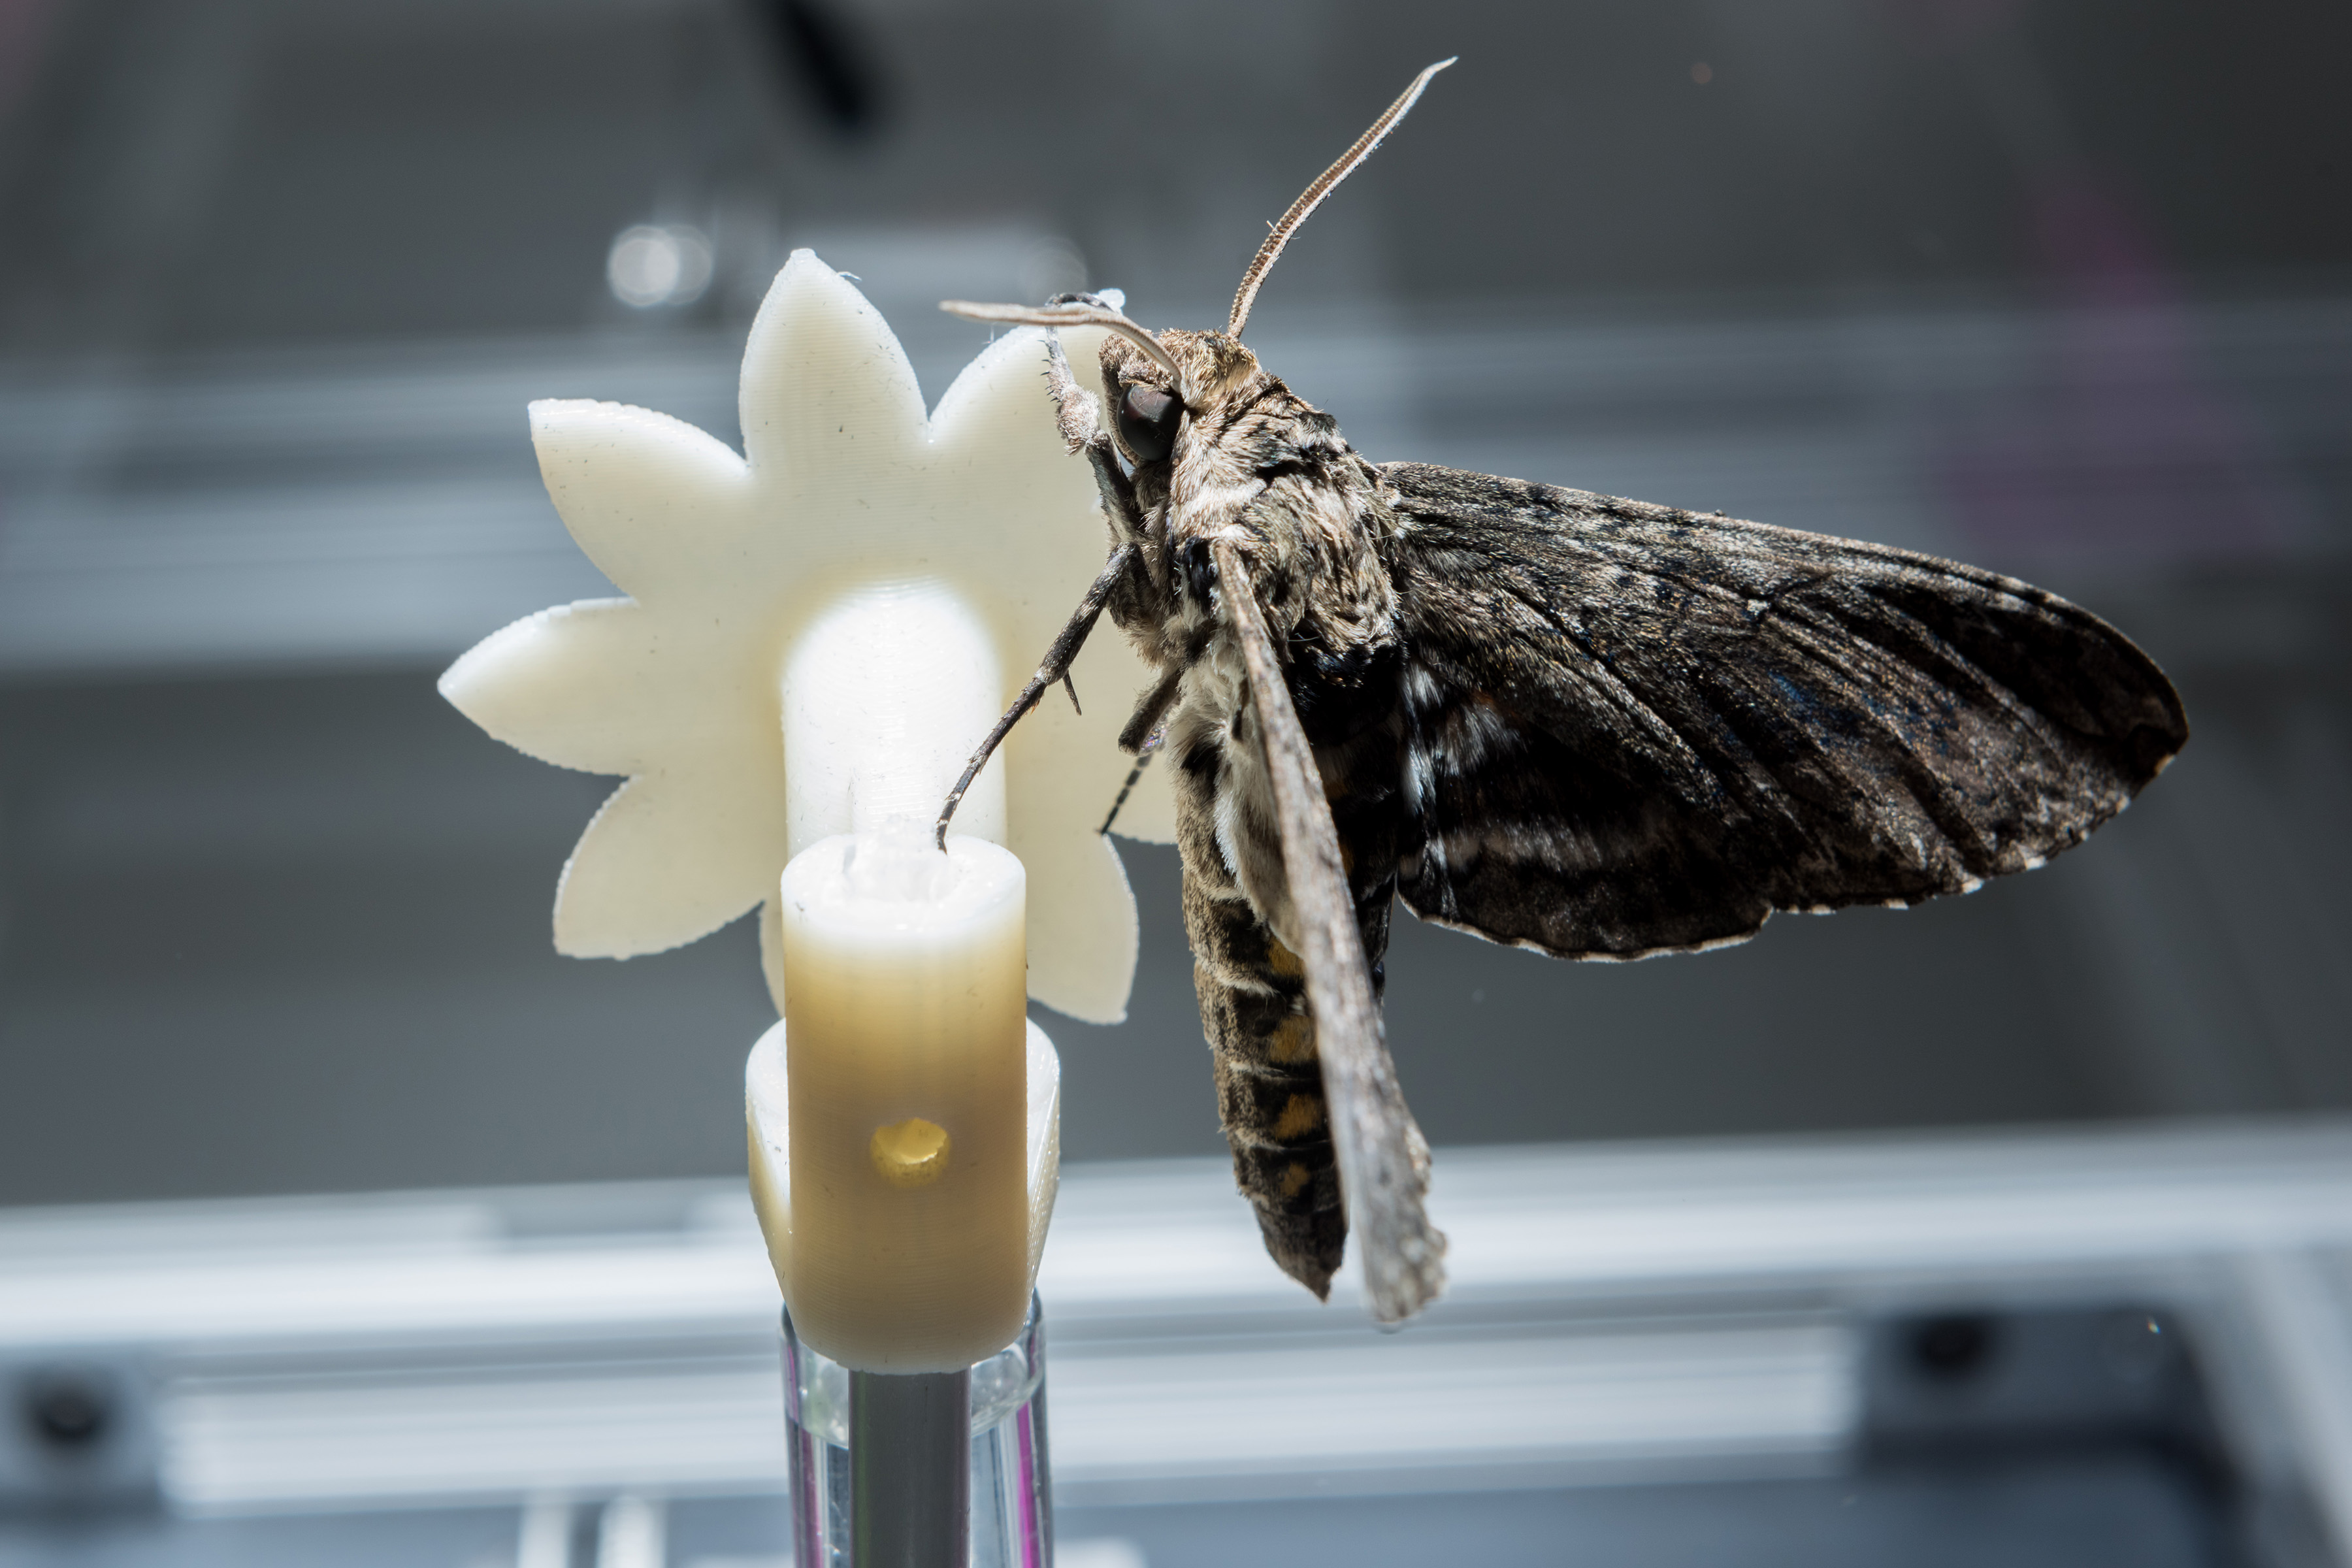 A hawk moth is shown on a robotic flower used to study the insect’s ability to track the moving flower under low-light conditions. The research shows that the creatures can slow their brains to improve vision under low-light conditions – while continuing to perform demanding tasks. (Credit: Rob Felt, Georgia Tech)